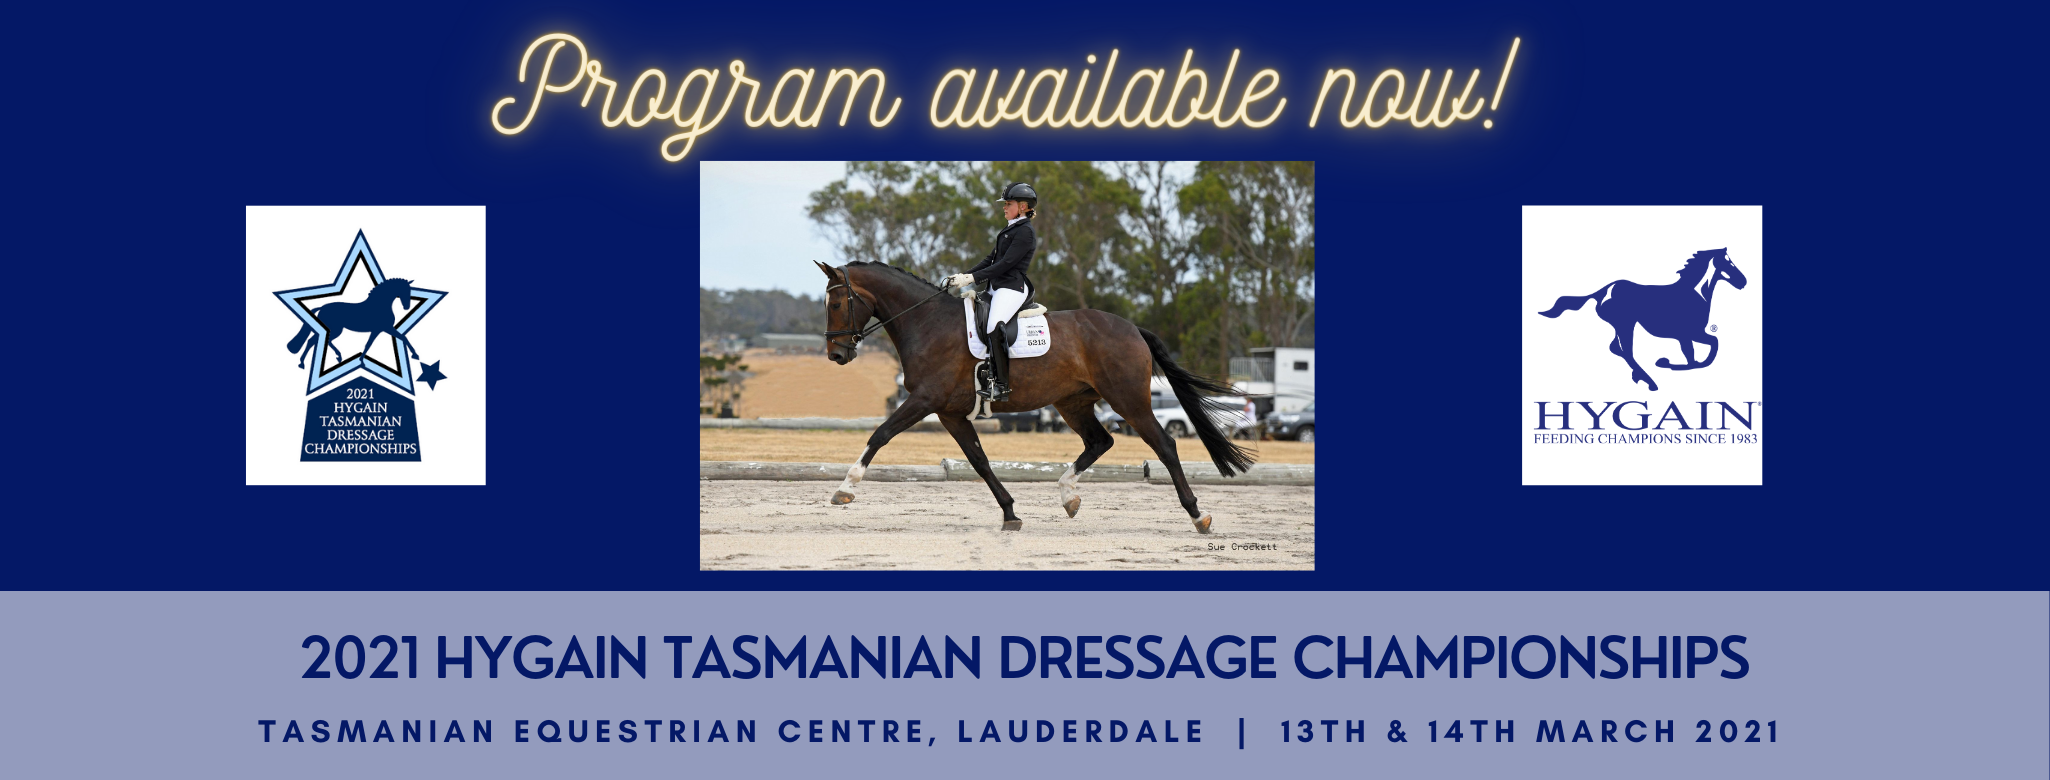 2021 Hygain Dressage Champs Program is Available